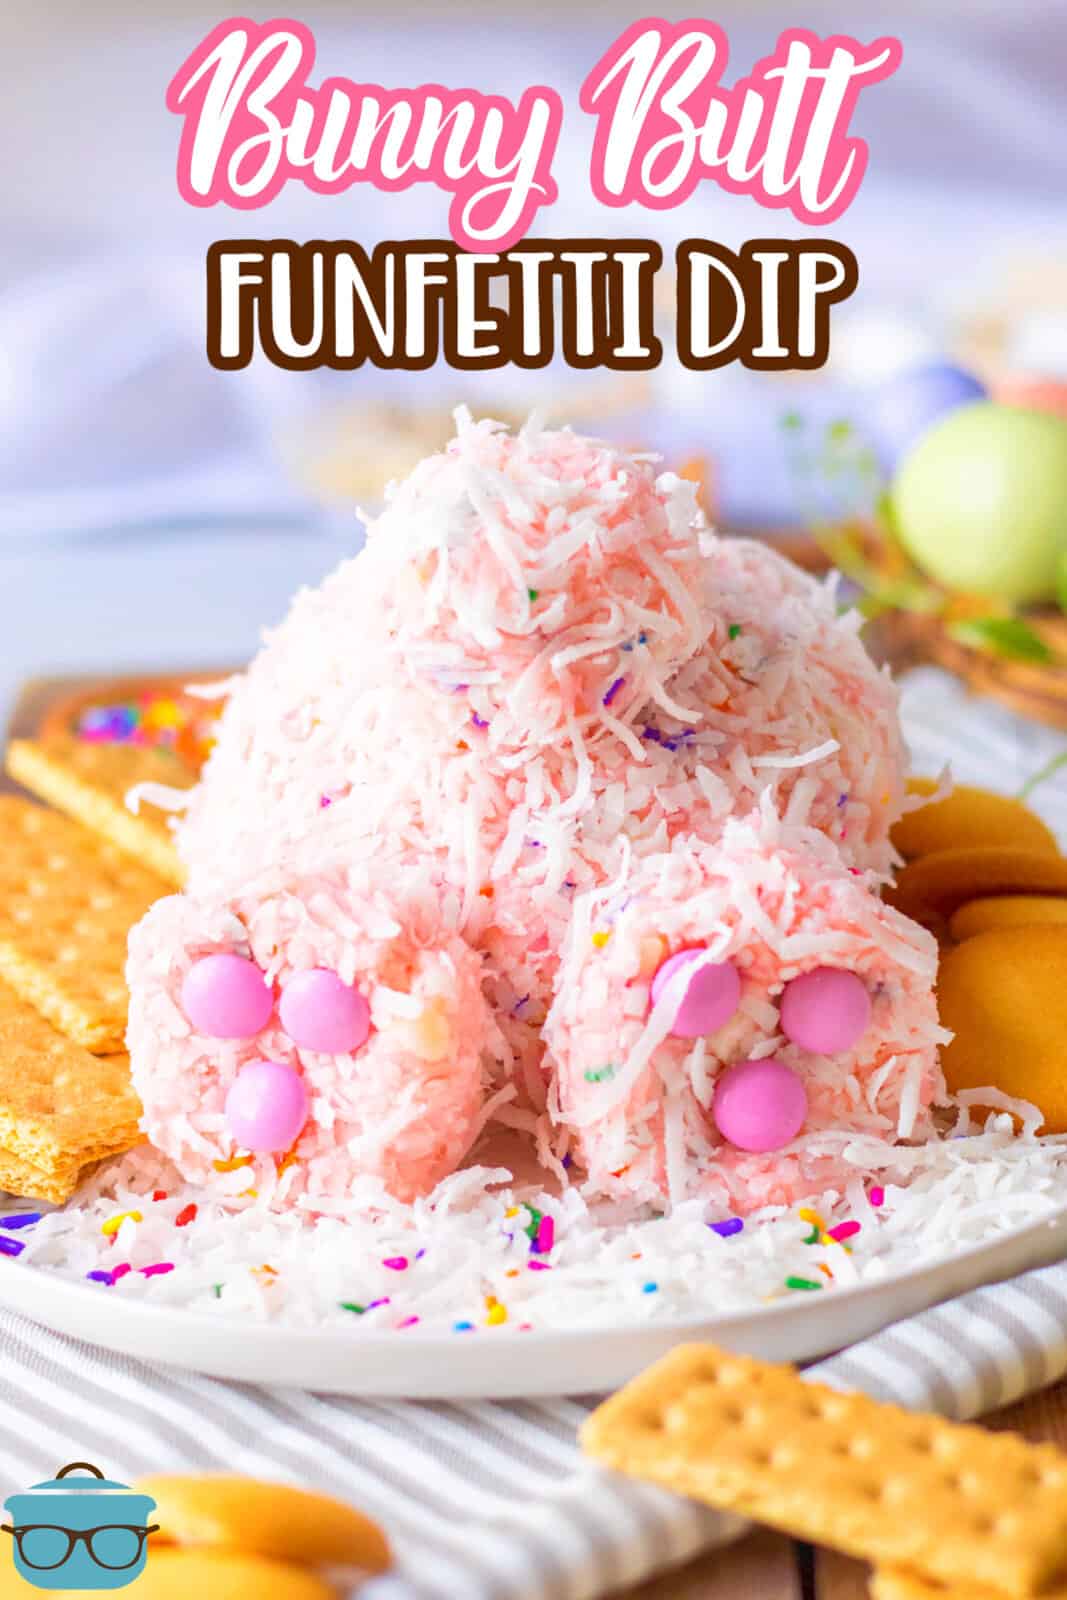 A Bunny Butt Funfetti Dip on a plate with treats around it to dip in it.